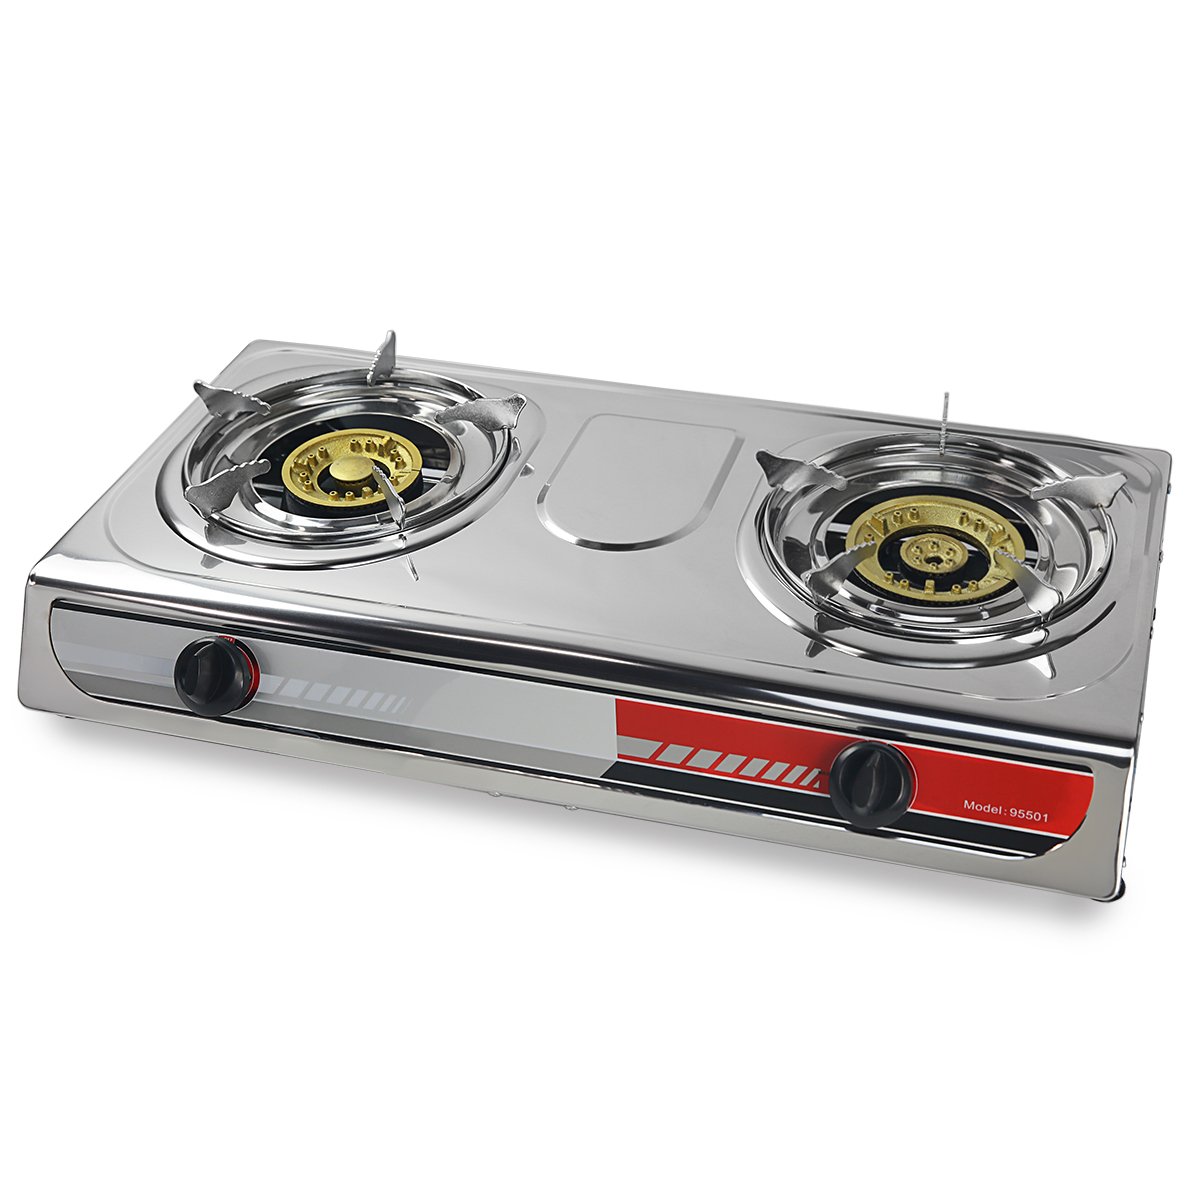 XtremepowerUS Double Burner Stove wAuto Ignition Outdoor Propane Portable Camping Cooking Range